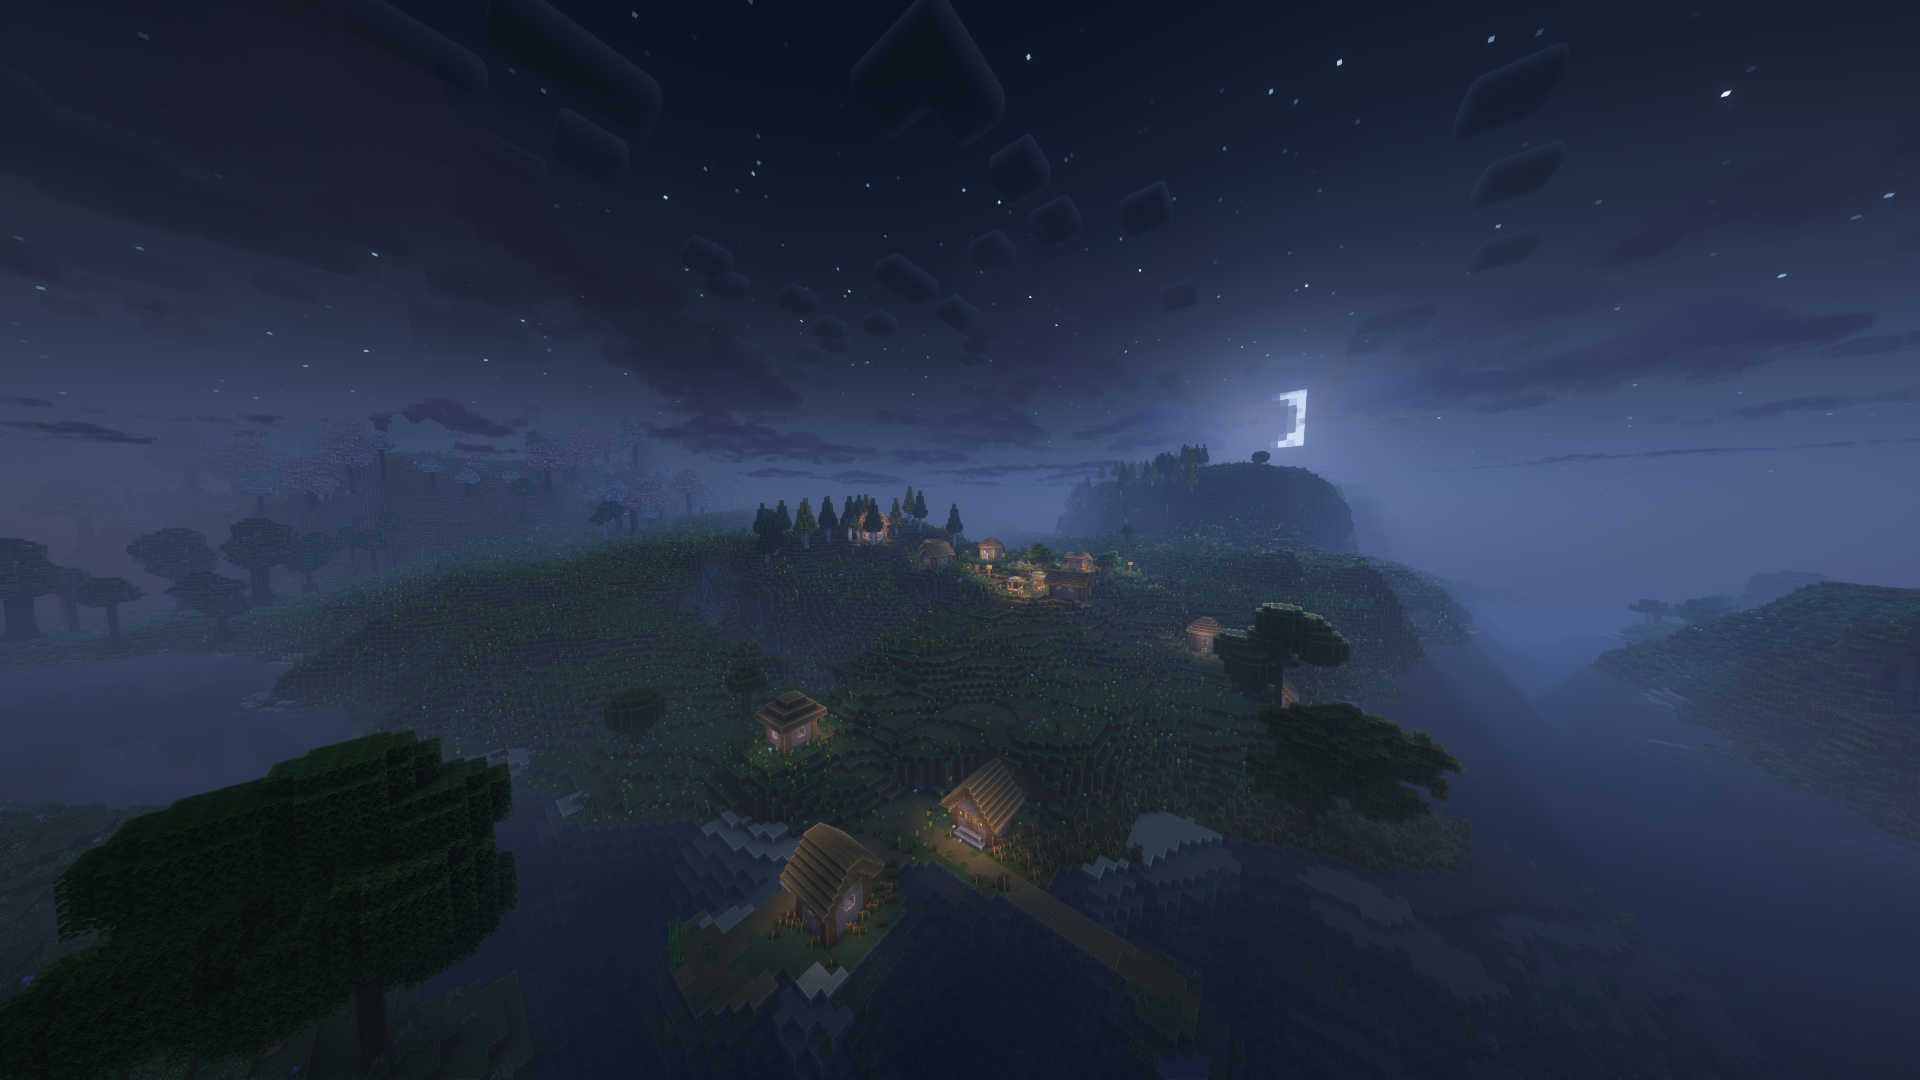 The Minecraft Overwold at night